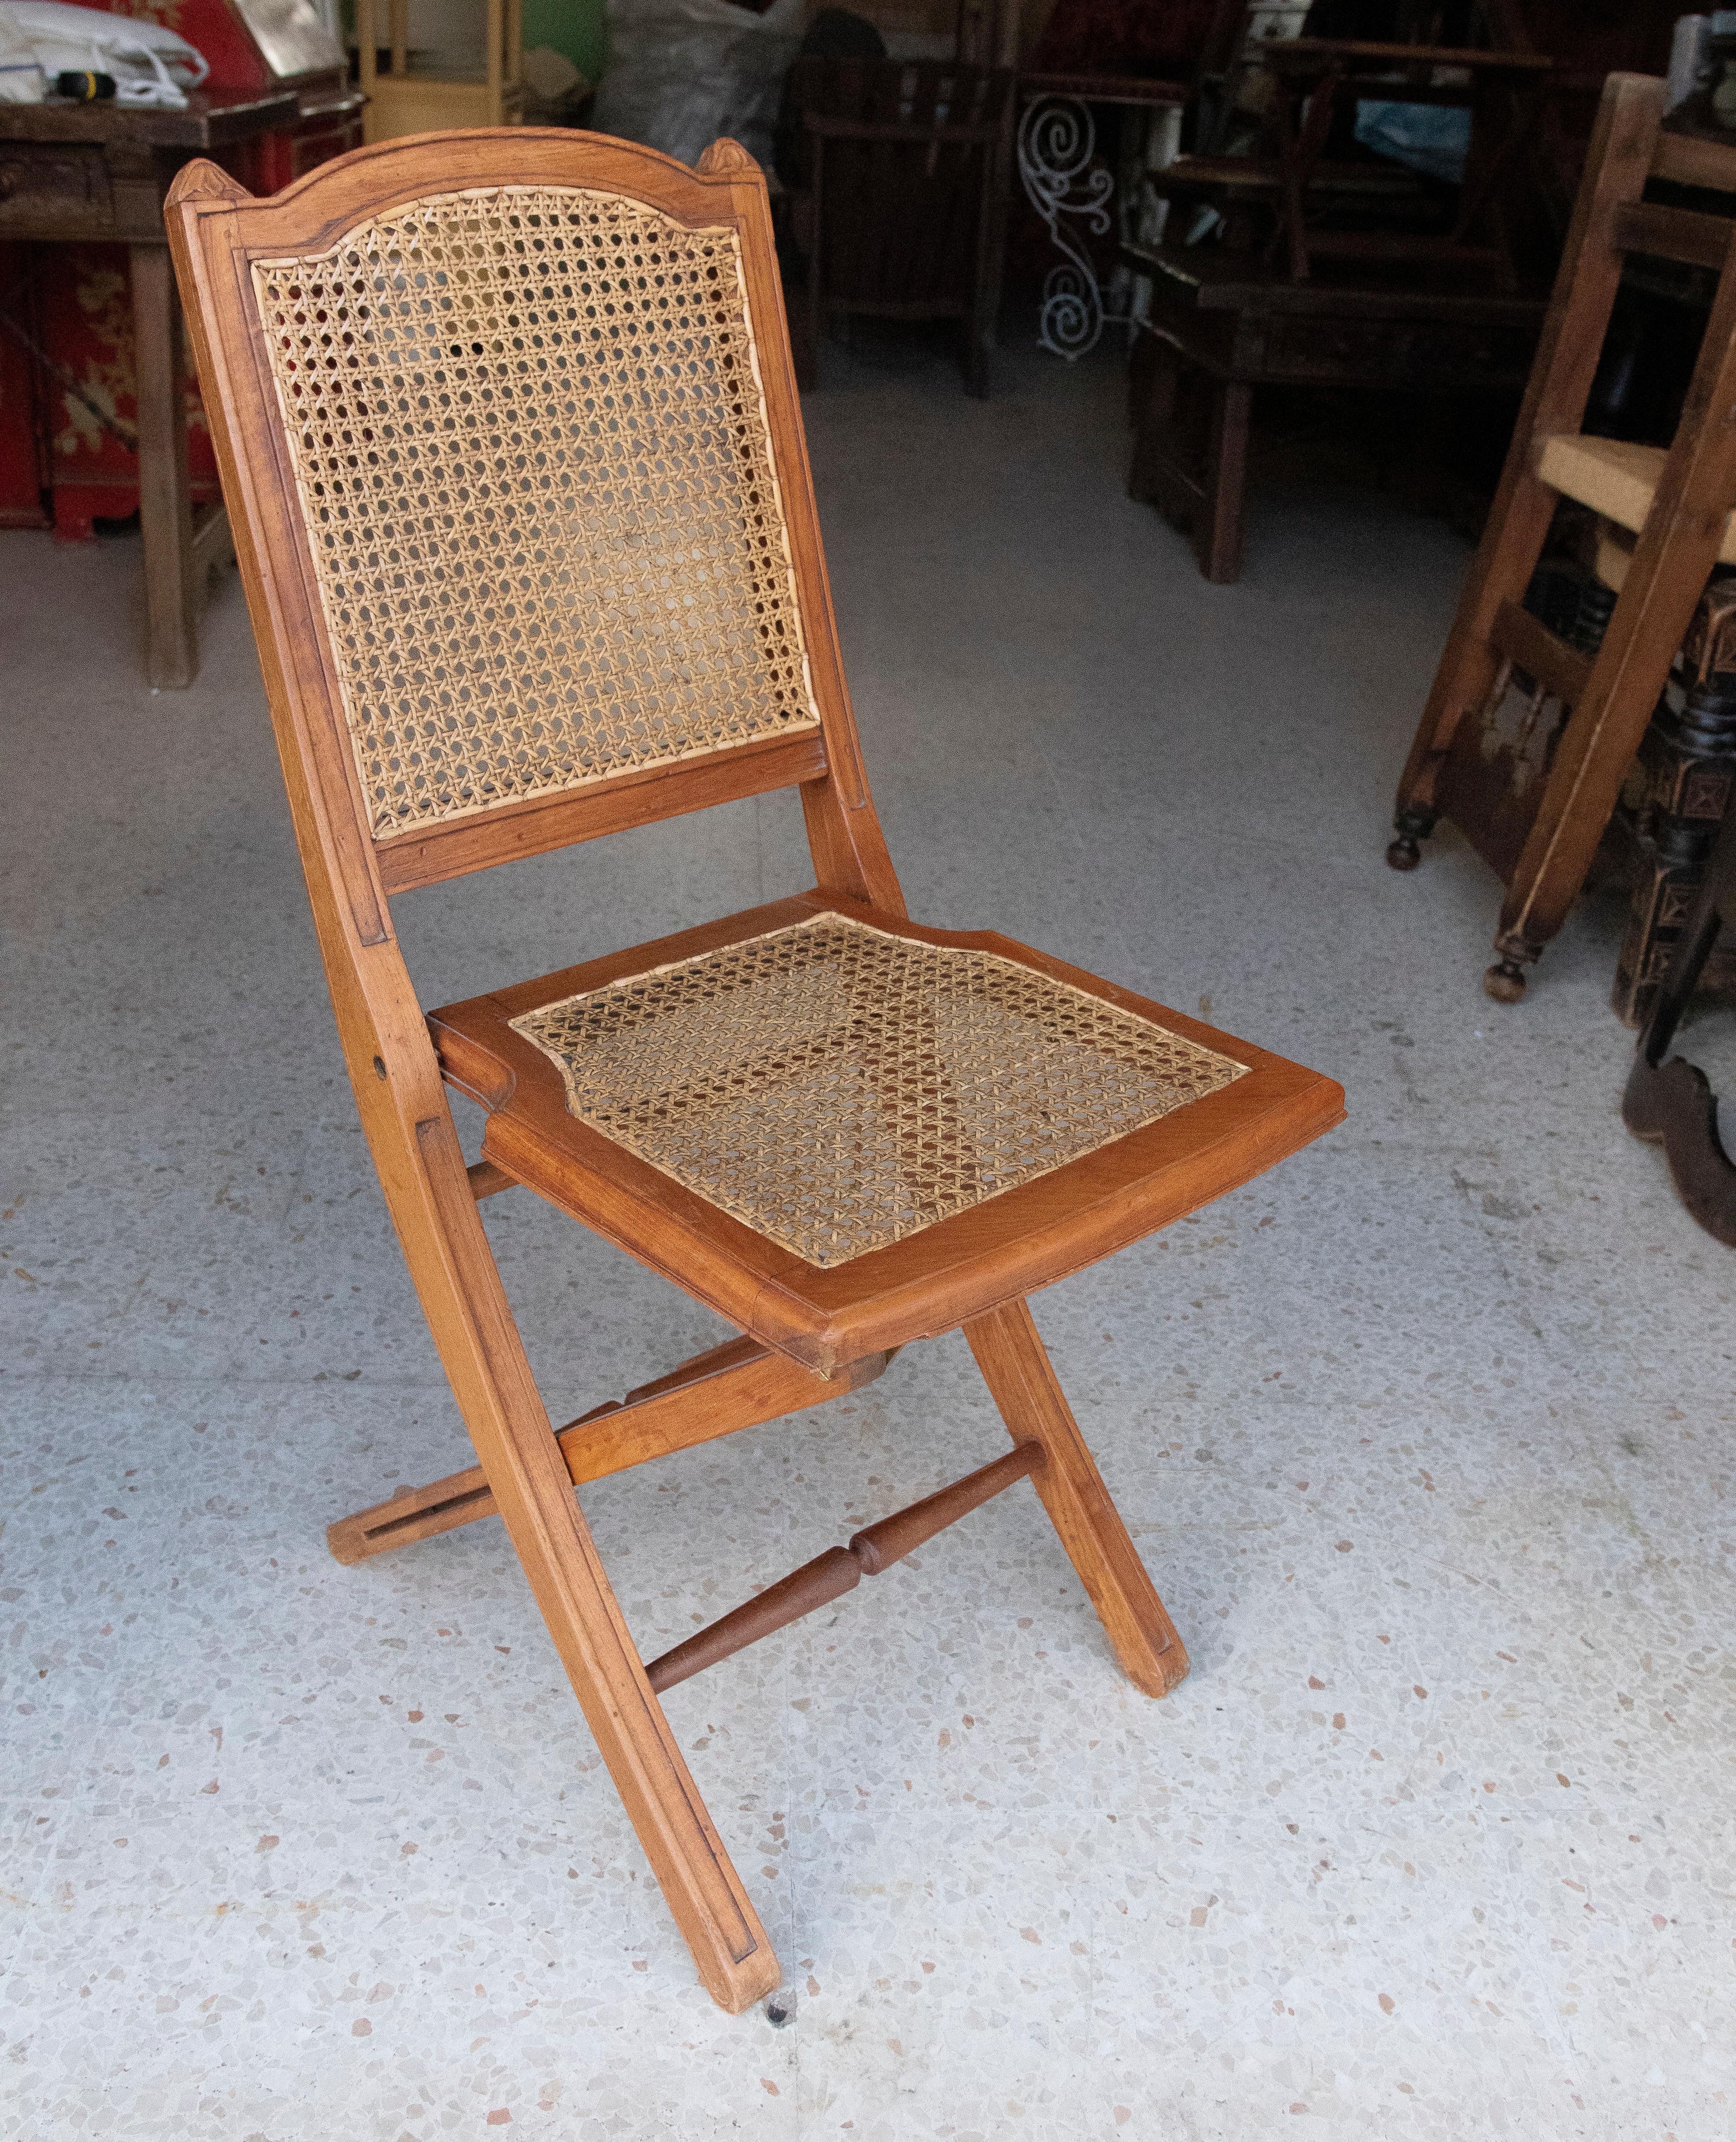 1970s Set of three wooden folding chairs with backrest and seat mesh.